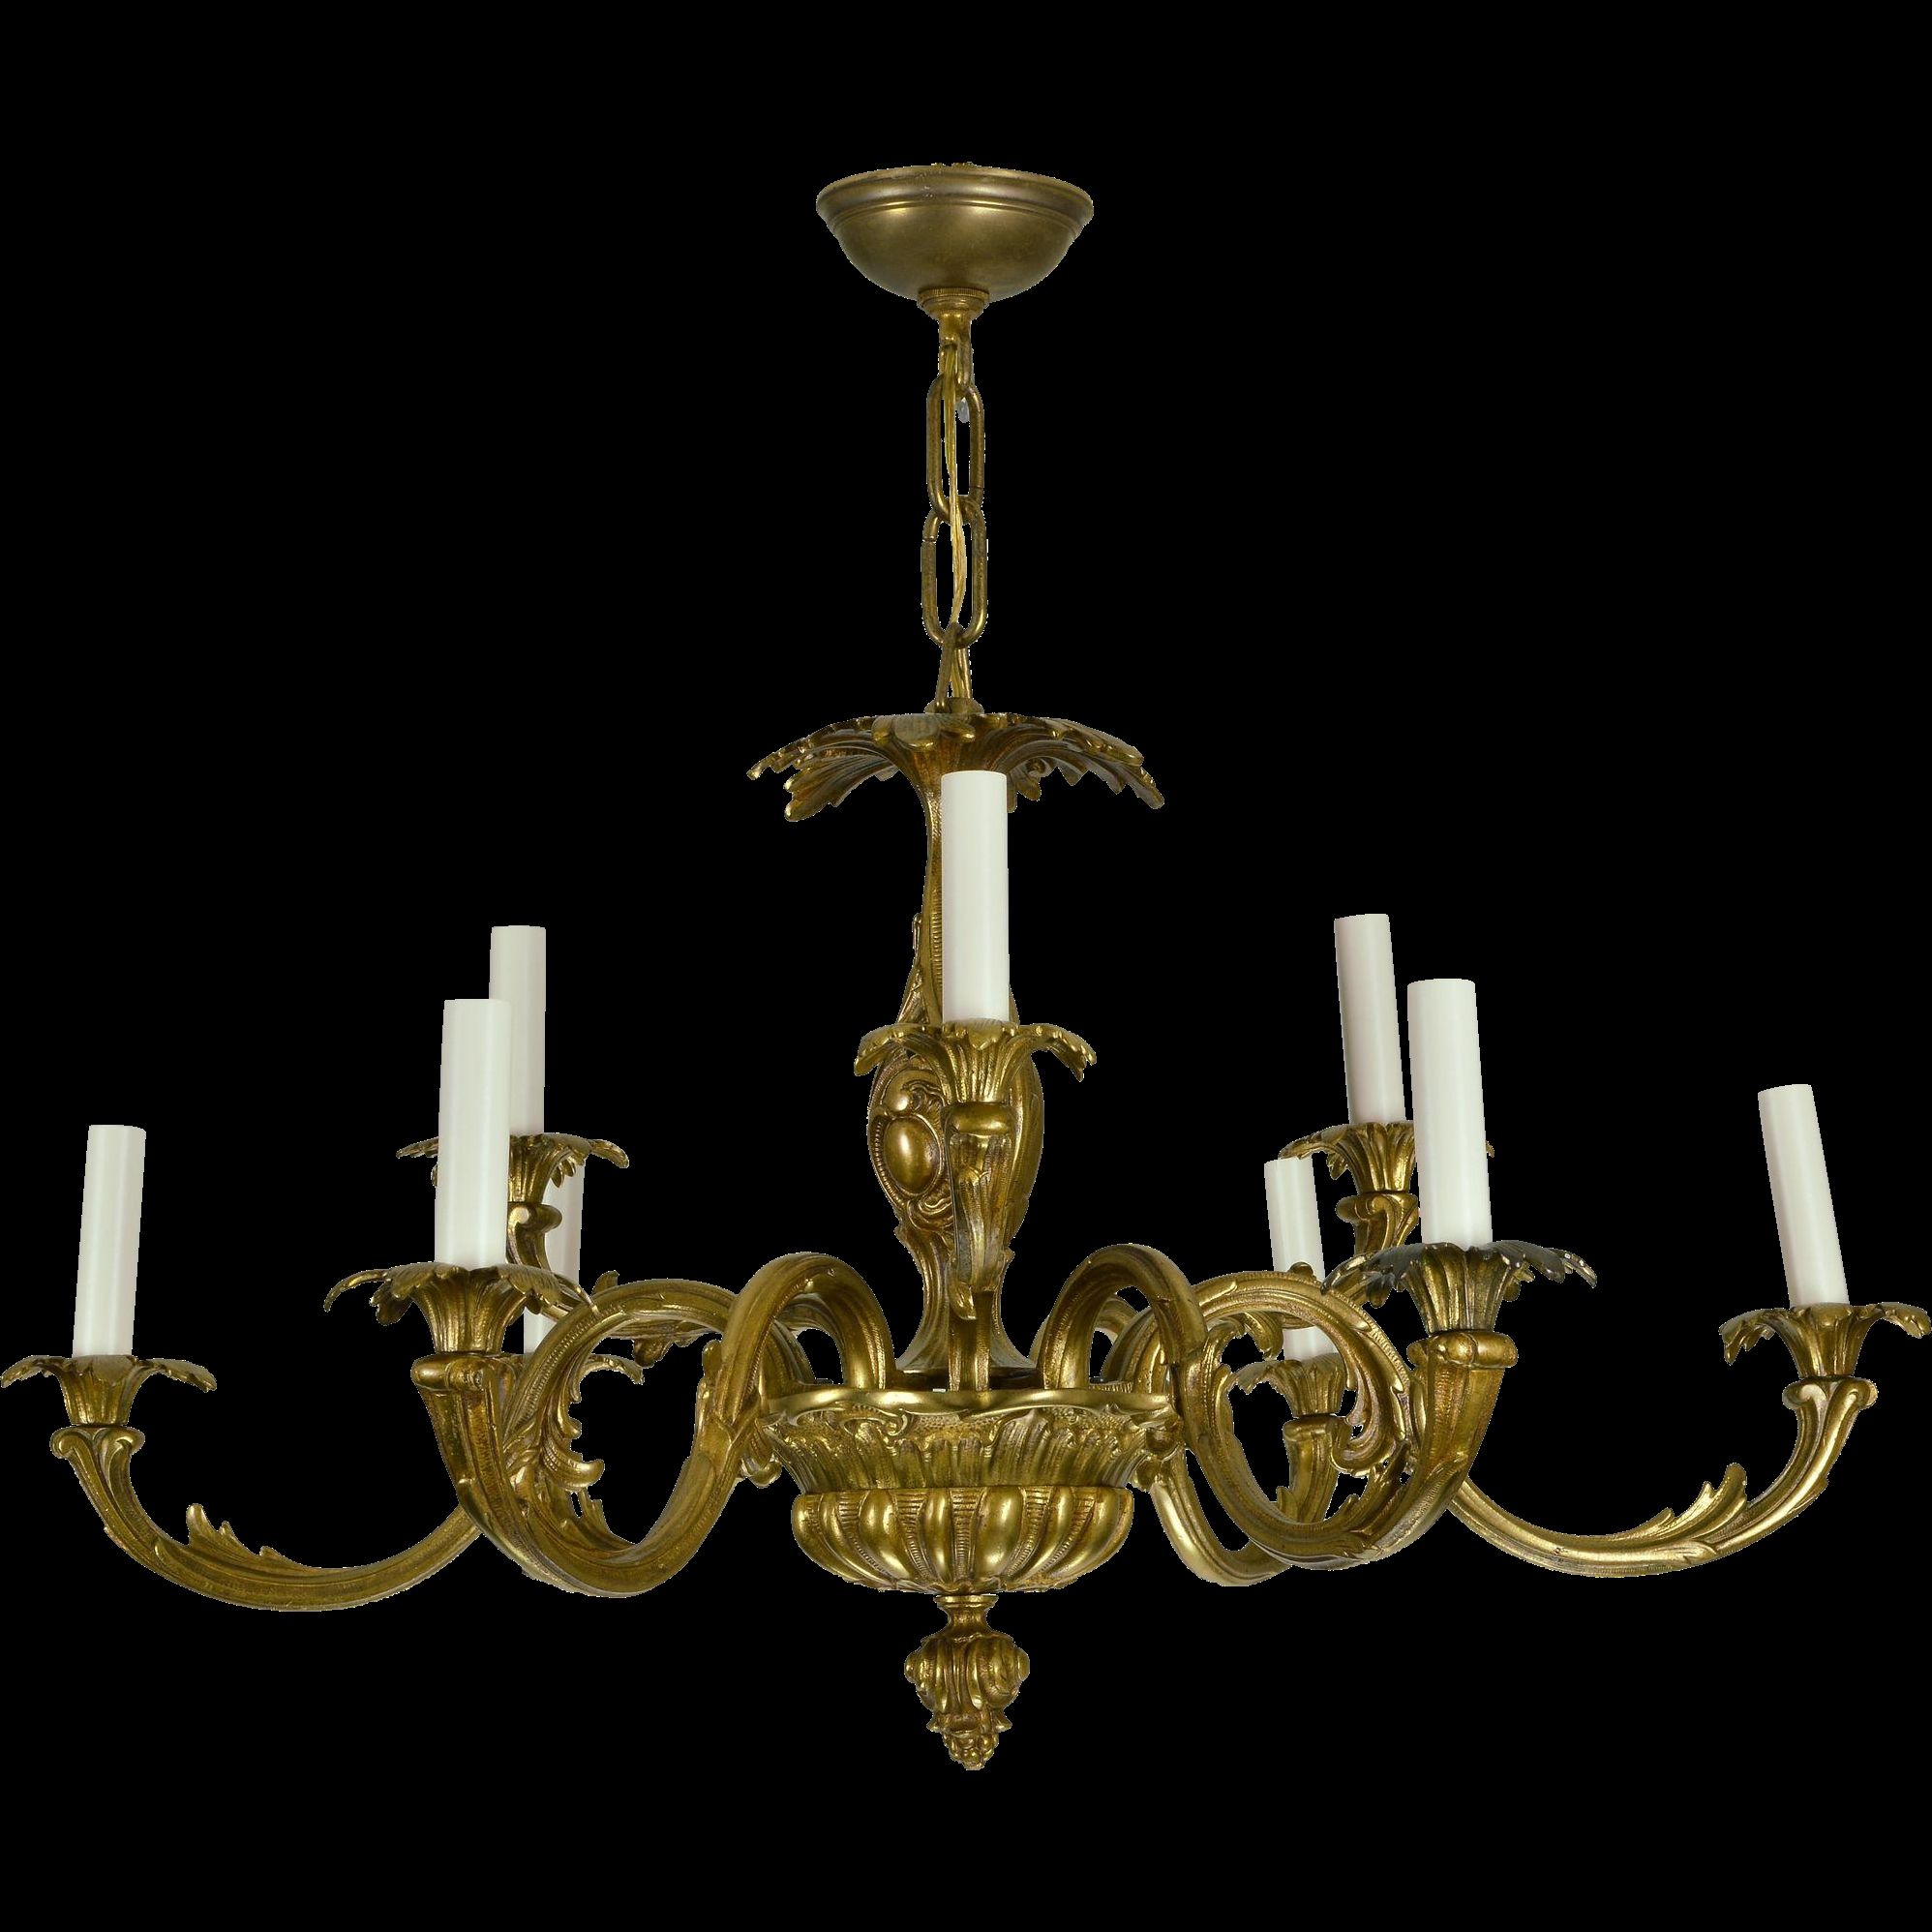 Vintage Brass French Baroque Chandelier From Tolw On Ru Lane Inside Large Brass Chandelier (View 4 of 15)